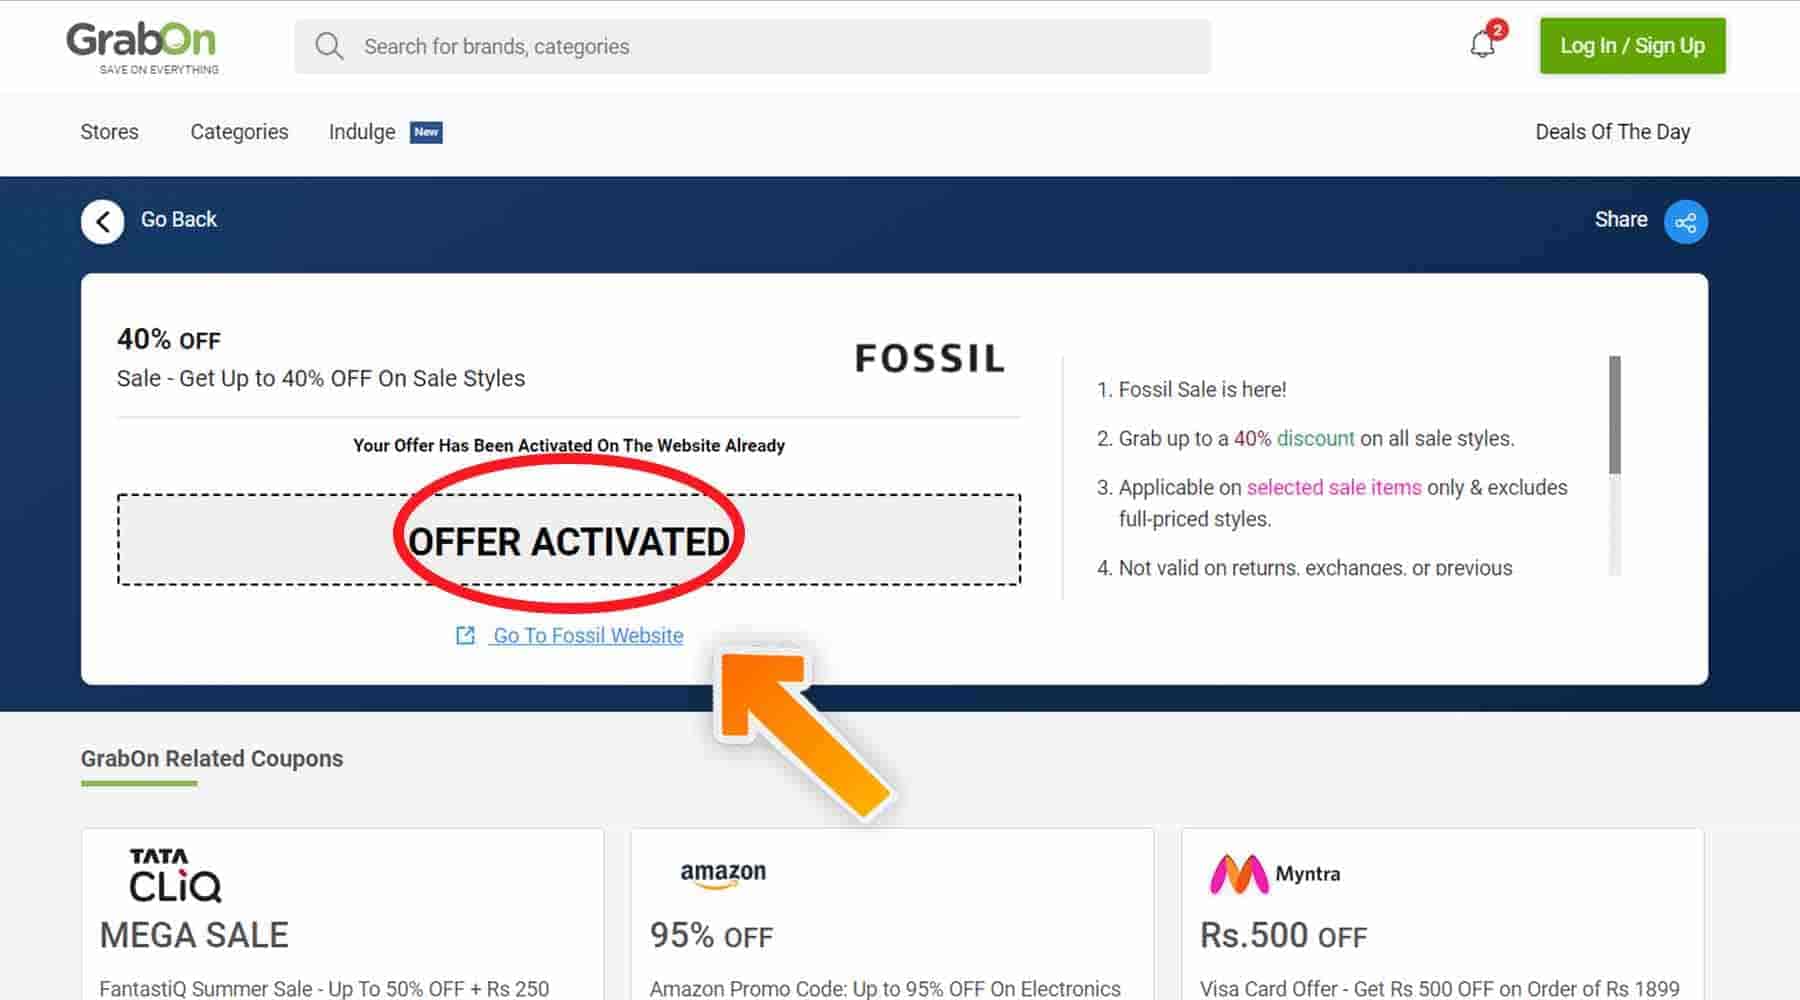 How to use Fossil Discount code